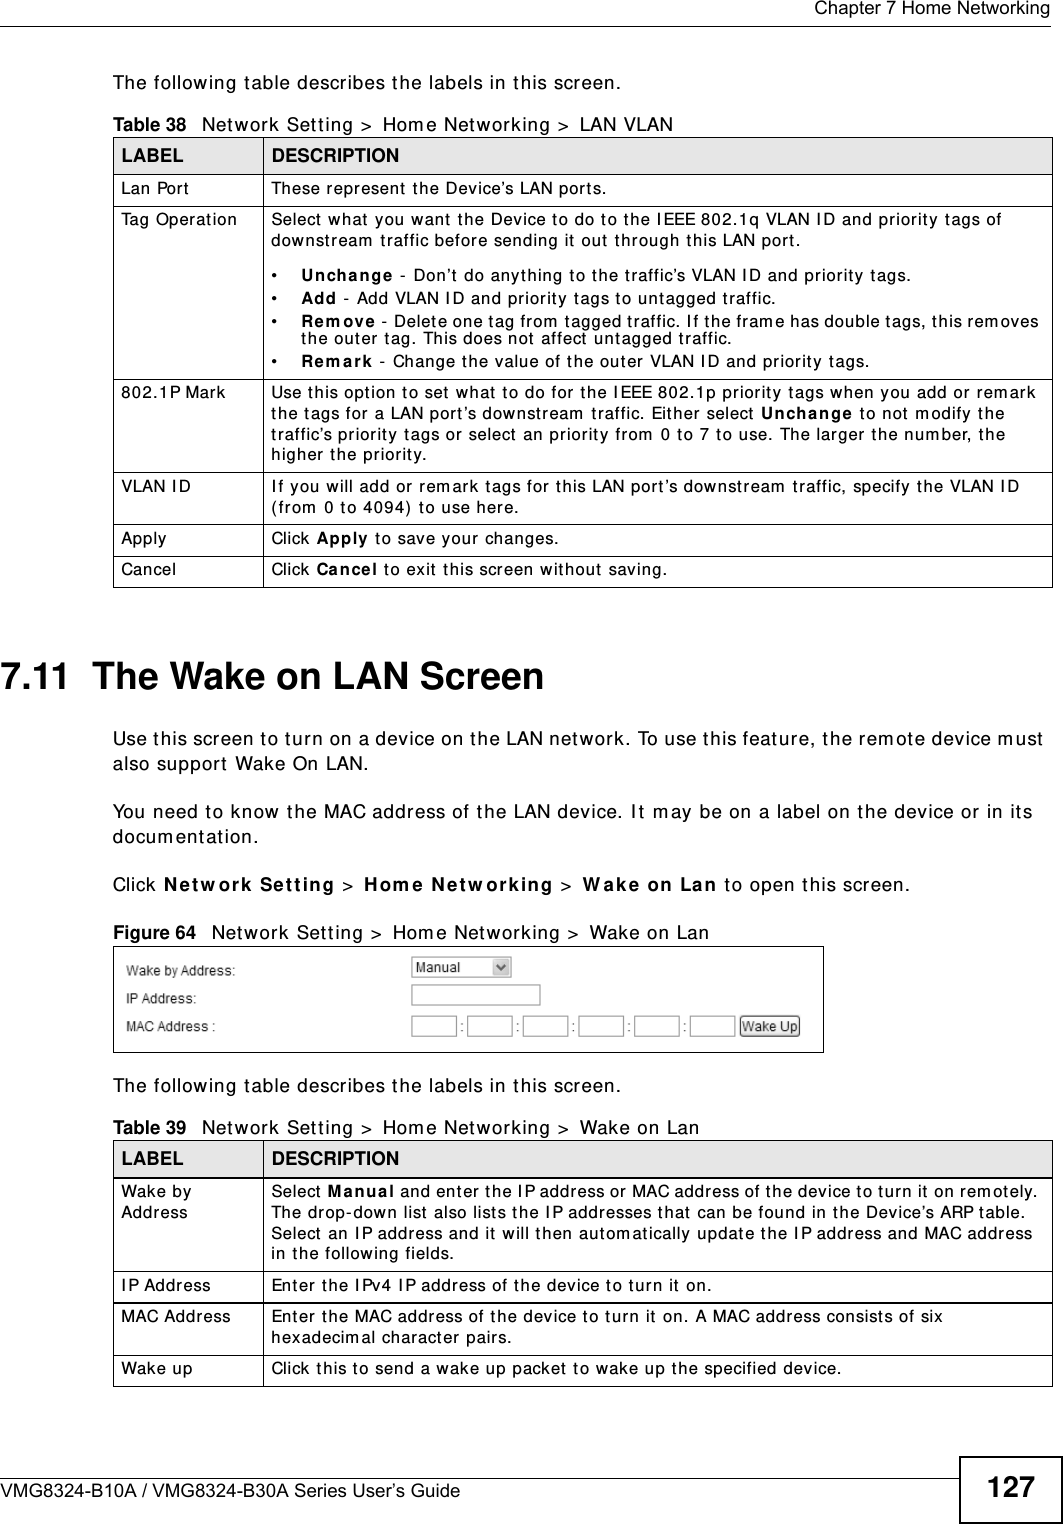  Chapter 7 Home NetworkingVMG8324-B10A / VMG8324-B30A Series User’s Guide 127The following t able describes t he labels in this screen.7.11  The Wake on LAN ScreenUse t his screen to turn on a device on t he LAN net work. To use t his feature, t he rem ot e device m ust  also support  Wake On LAN.You need t o know t he MAC address of t he LAN device. I t  m ay be on a label on t he device or in its docum ent at ion.Click N et w ork  Se t t ing &gt;  H om e N e t w or k ing &gt;  W ak e  on  La n  to open this screen.  Figure 64   Net work Set t ing &gt;  Hom e Net w orking &gt;  Wake on LanThe following t able describes t he labels in this screen.Table 38   Net work Sett ing &gt;  Hom e Net w orking &gt;  LAN VLANLABEL DESCRIPTIONLan Port These represent the Device’s LAN ports.Tag Operat ion Select  what you want  the Device t o do t o t he I EEE 802.1q VLAN I D and priorit y tags of downstream  t raffic before sending it out t hrough this LAN port.•Unch a nge  -  Don’t  do anyt hing t o t he t raffic’s VLAN I D and priorit y tags.•Add  -  Add VLAN I D and priority  tags t o unt agged traffic.•Re m ove -  Delet e one t ag from  t agged traffic. I f the fram e has double t ags, t his rem oves the outer t ag. This does not  affect untagged t raffic.•Re m a r k  -  Change t he value of t he outer VLAN I D and priorit y tags.802.1P Mark Use t his opt ion to set  what t o do for t he I EEE 802.1p priorit y t ags when you add or rem ark the tags for a LAN port ’s downst ream  t raffic. Eit her select  Unch a nge  to not m odify t he traffic’s priorit y t ags or select  an priorit y  fr om  0 t o 7 t o use. The larger the num ber, t he higher the priority.VLAN I D I f you will add or rem ark  tags for this LAN port ’s downst ream  traffic, specify the VLAN I D (from  0 to 4094)  t o use here.Apply Click Apply to save your changes.Cancel Click Ca nce l to exit t his screen without  saving.Table 39   Net work Sett ing &gt;  Hom e Net w orking &gt;  Wake on LanLABEL DESCRIPTIONWak e b y  AddressSelect  M anua l and enter  t he I P addr ess or  MAC addr ess of t he device t o t urn it  on rem otely. The drop- down list  also list s the I P addr esses t hat  can be found in the Device’s ARP table. Select  an I P address and it  will t hen autom at ically updat e t he I P address and MAC address in t he following fields.I P Address Enter the I Pv4 I P address of the device t o t urn it  on.MAC Address Ent er  the MAC address of the dev ice t o t urn it on. A MAC address consists of six hexadecim al charact er pairs.Wake up Click this to send a wak e up packet t o wake up t he specified device. 